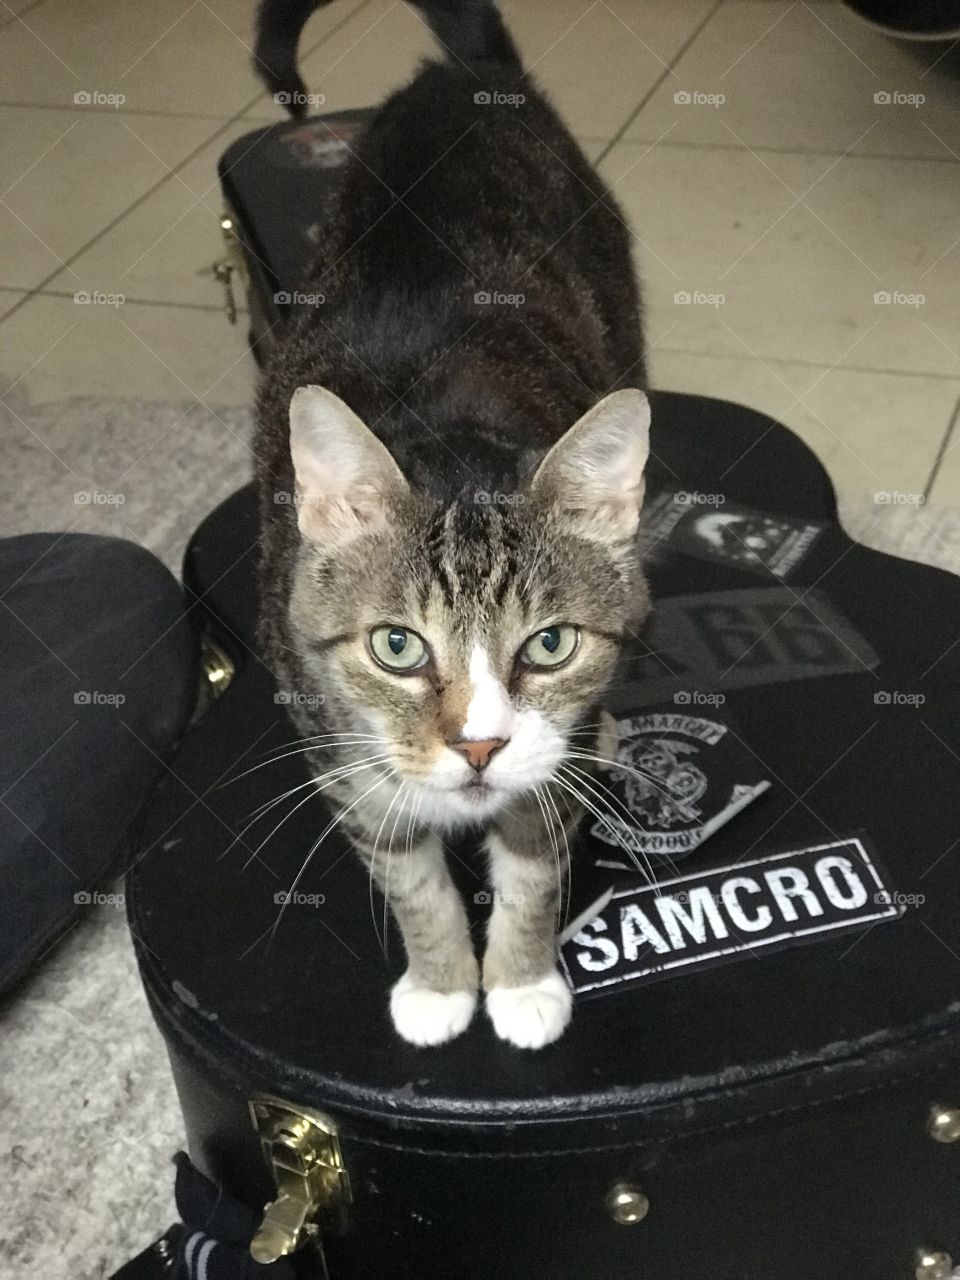 Cats of Anarchy